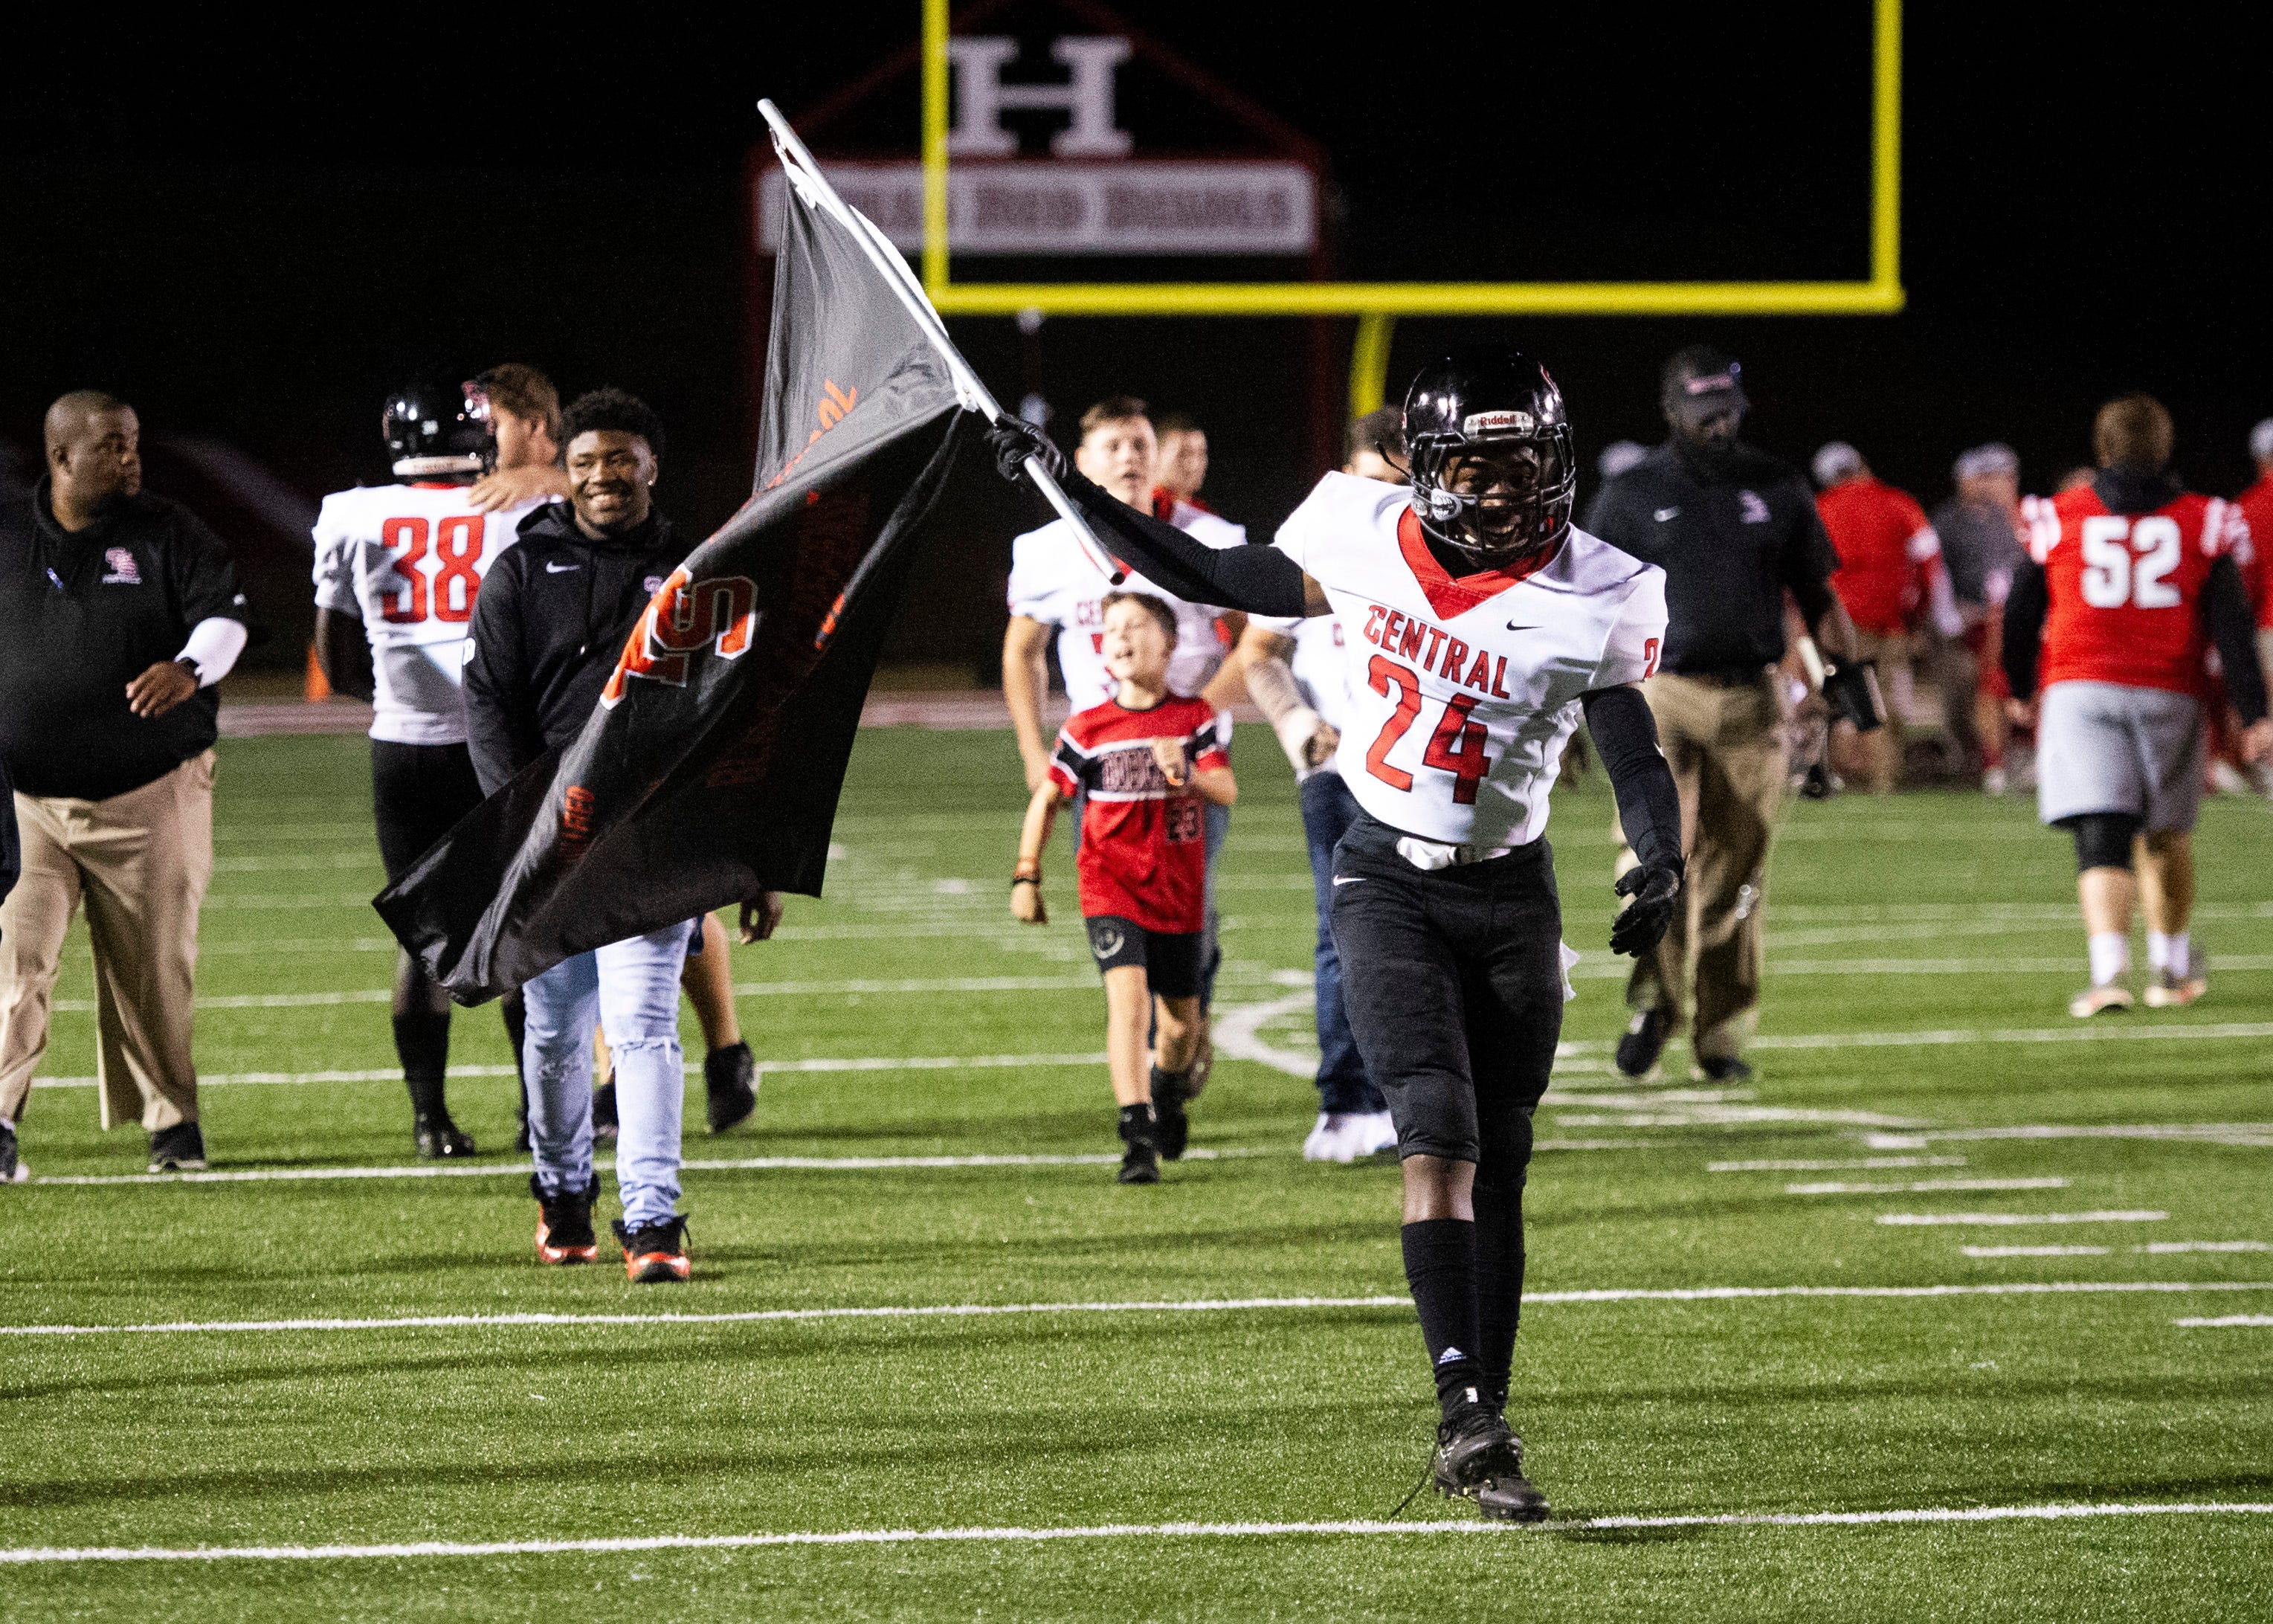 Central's Deontae White (24) runs with the "Black Flag Defense" flag after the Halls and Central high school football game on Friday, October 4, 2019 at Halls High School.